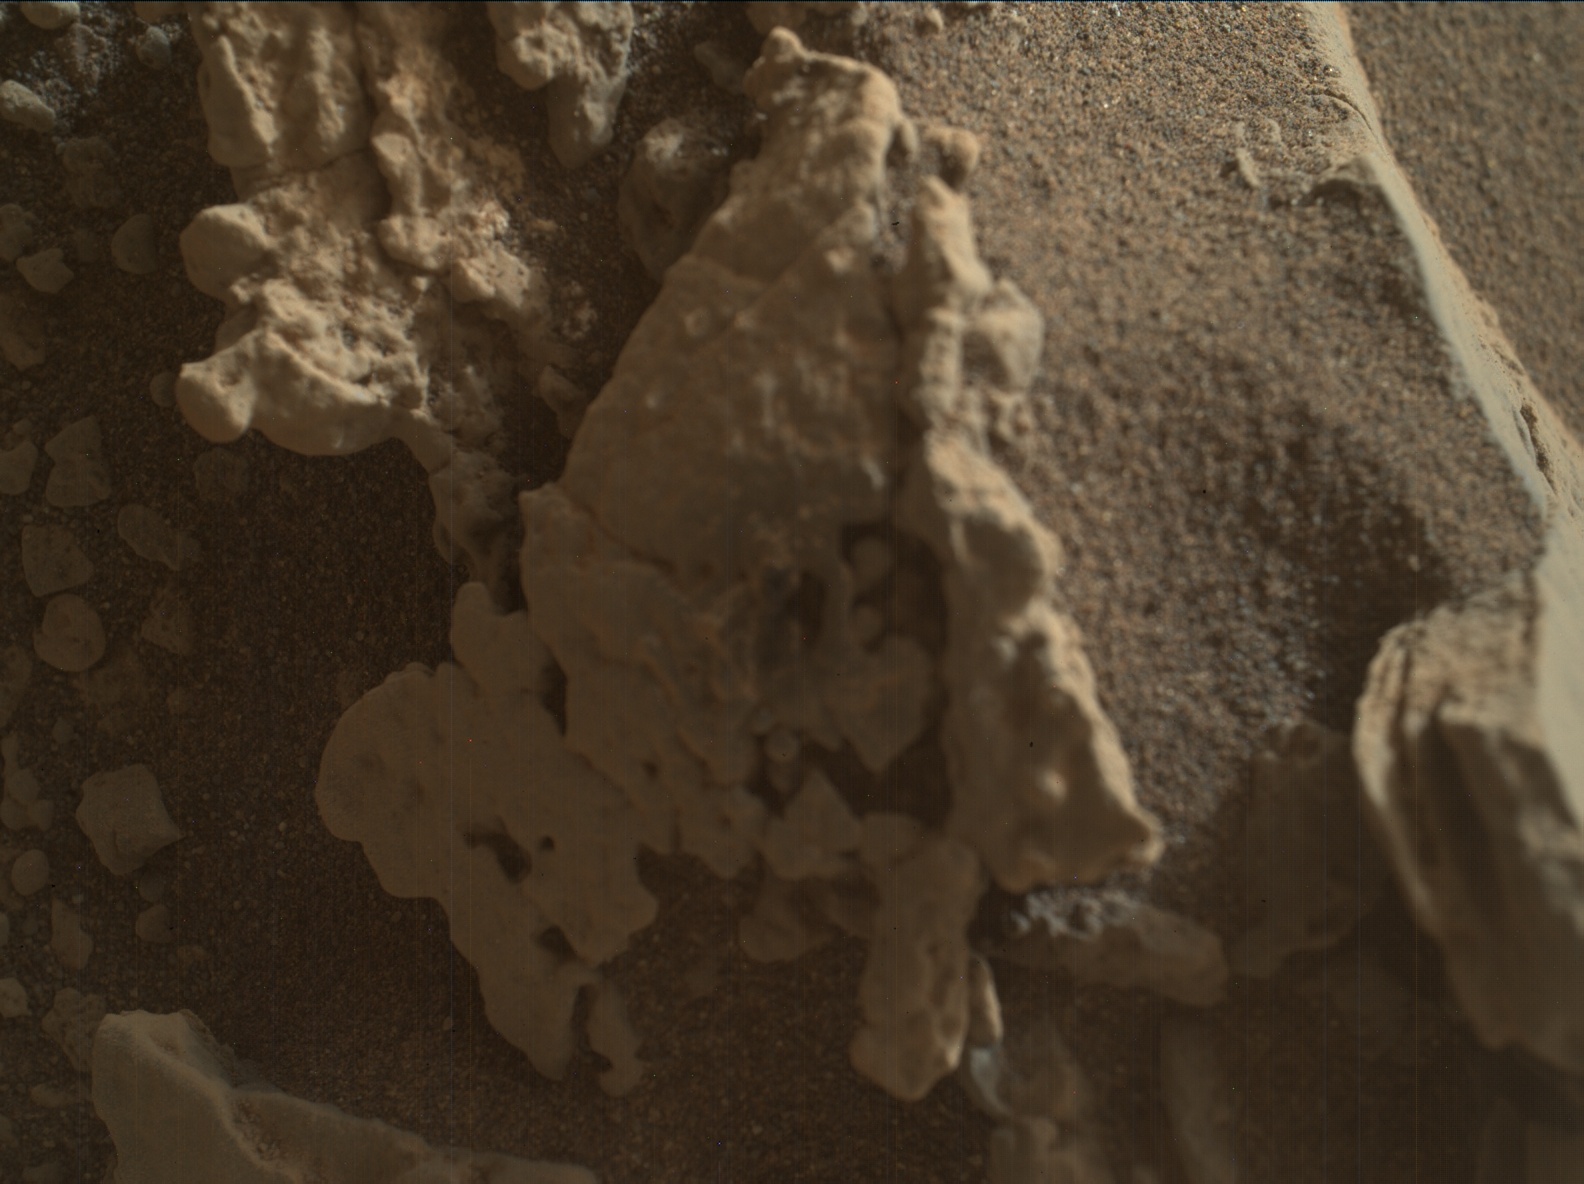 Nasa's Mars rover Curiosity acquired this image using its Mars Hand Lens Imager (MAHLI) on Sol 2690